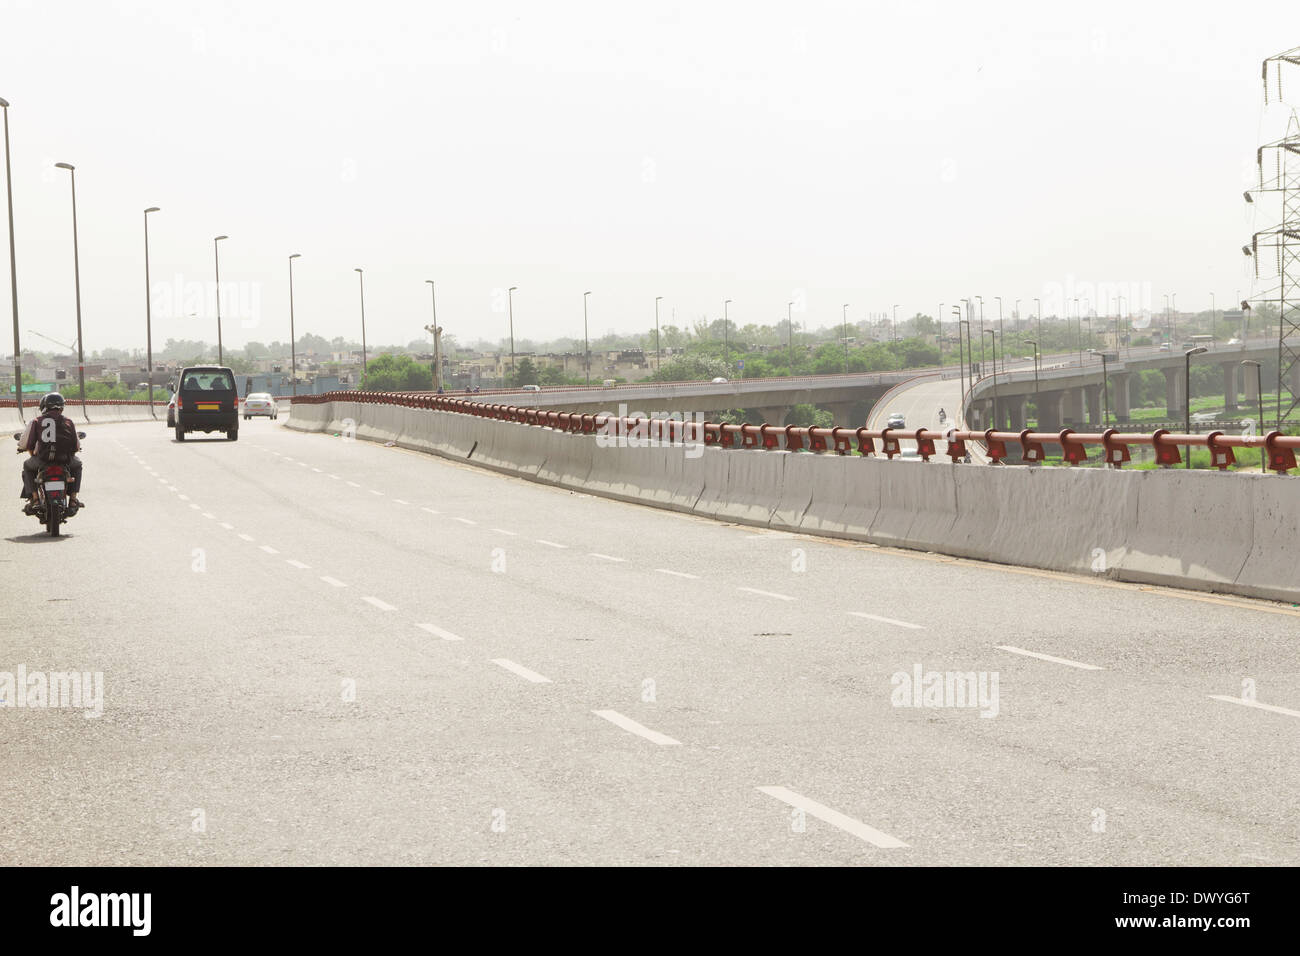 Indian freeway flyover Stock Photo